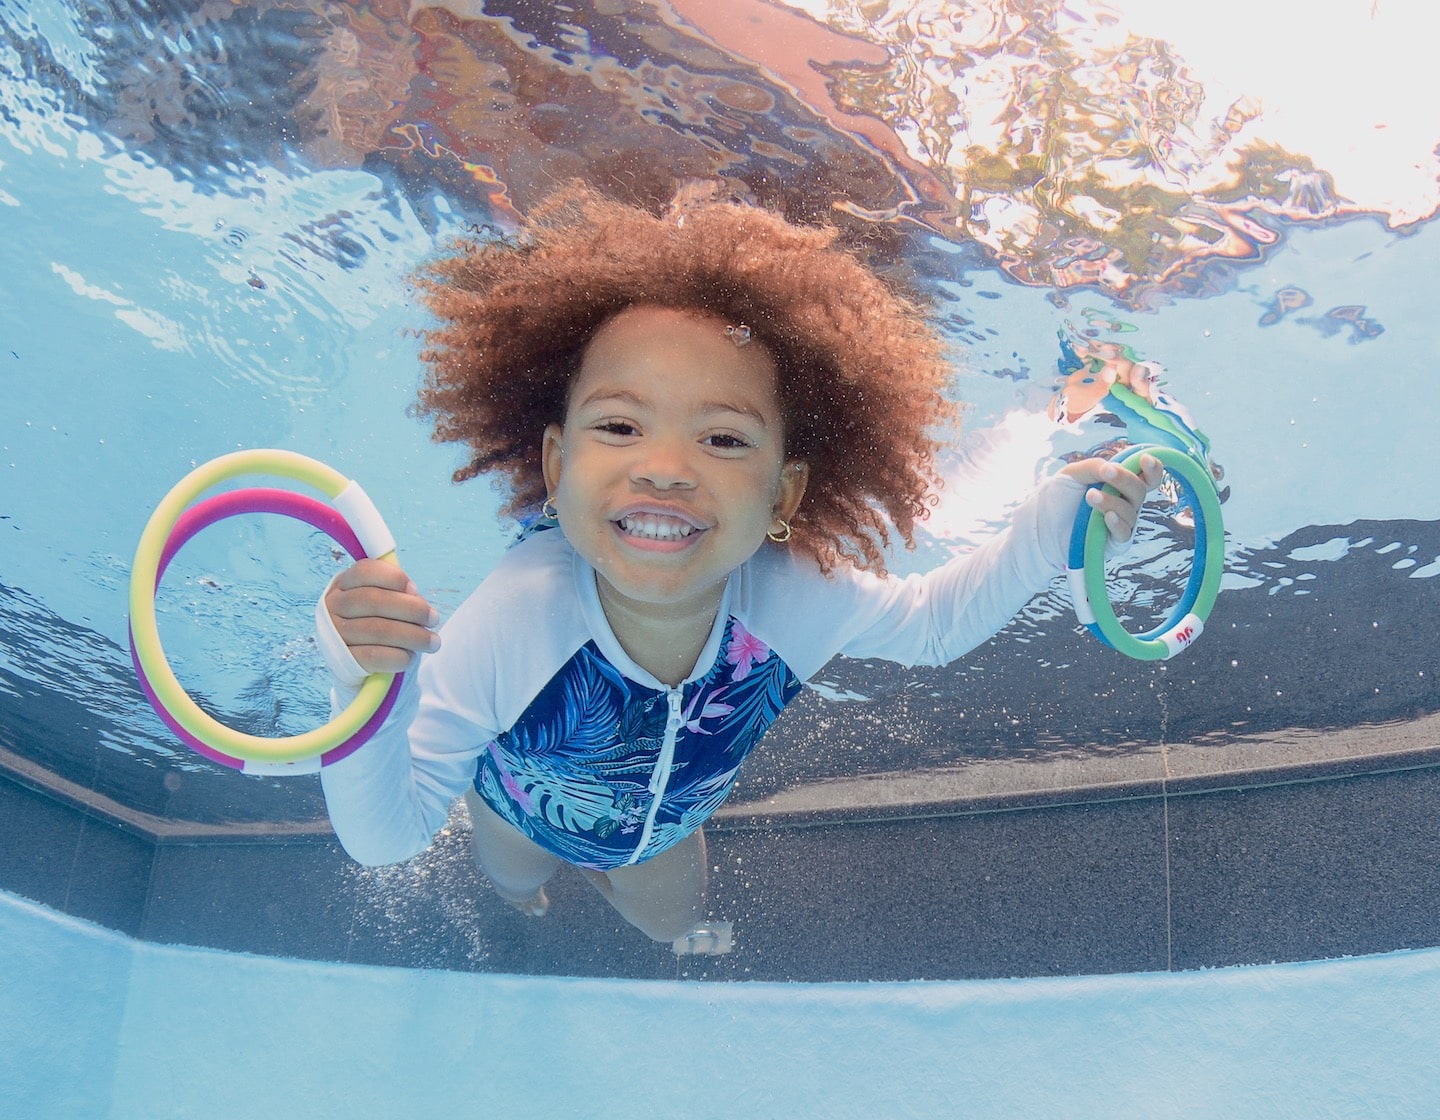 learn to swim at aquaducks with these easy and fun swim skills playgroup baby class